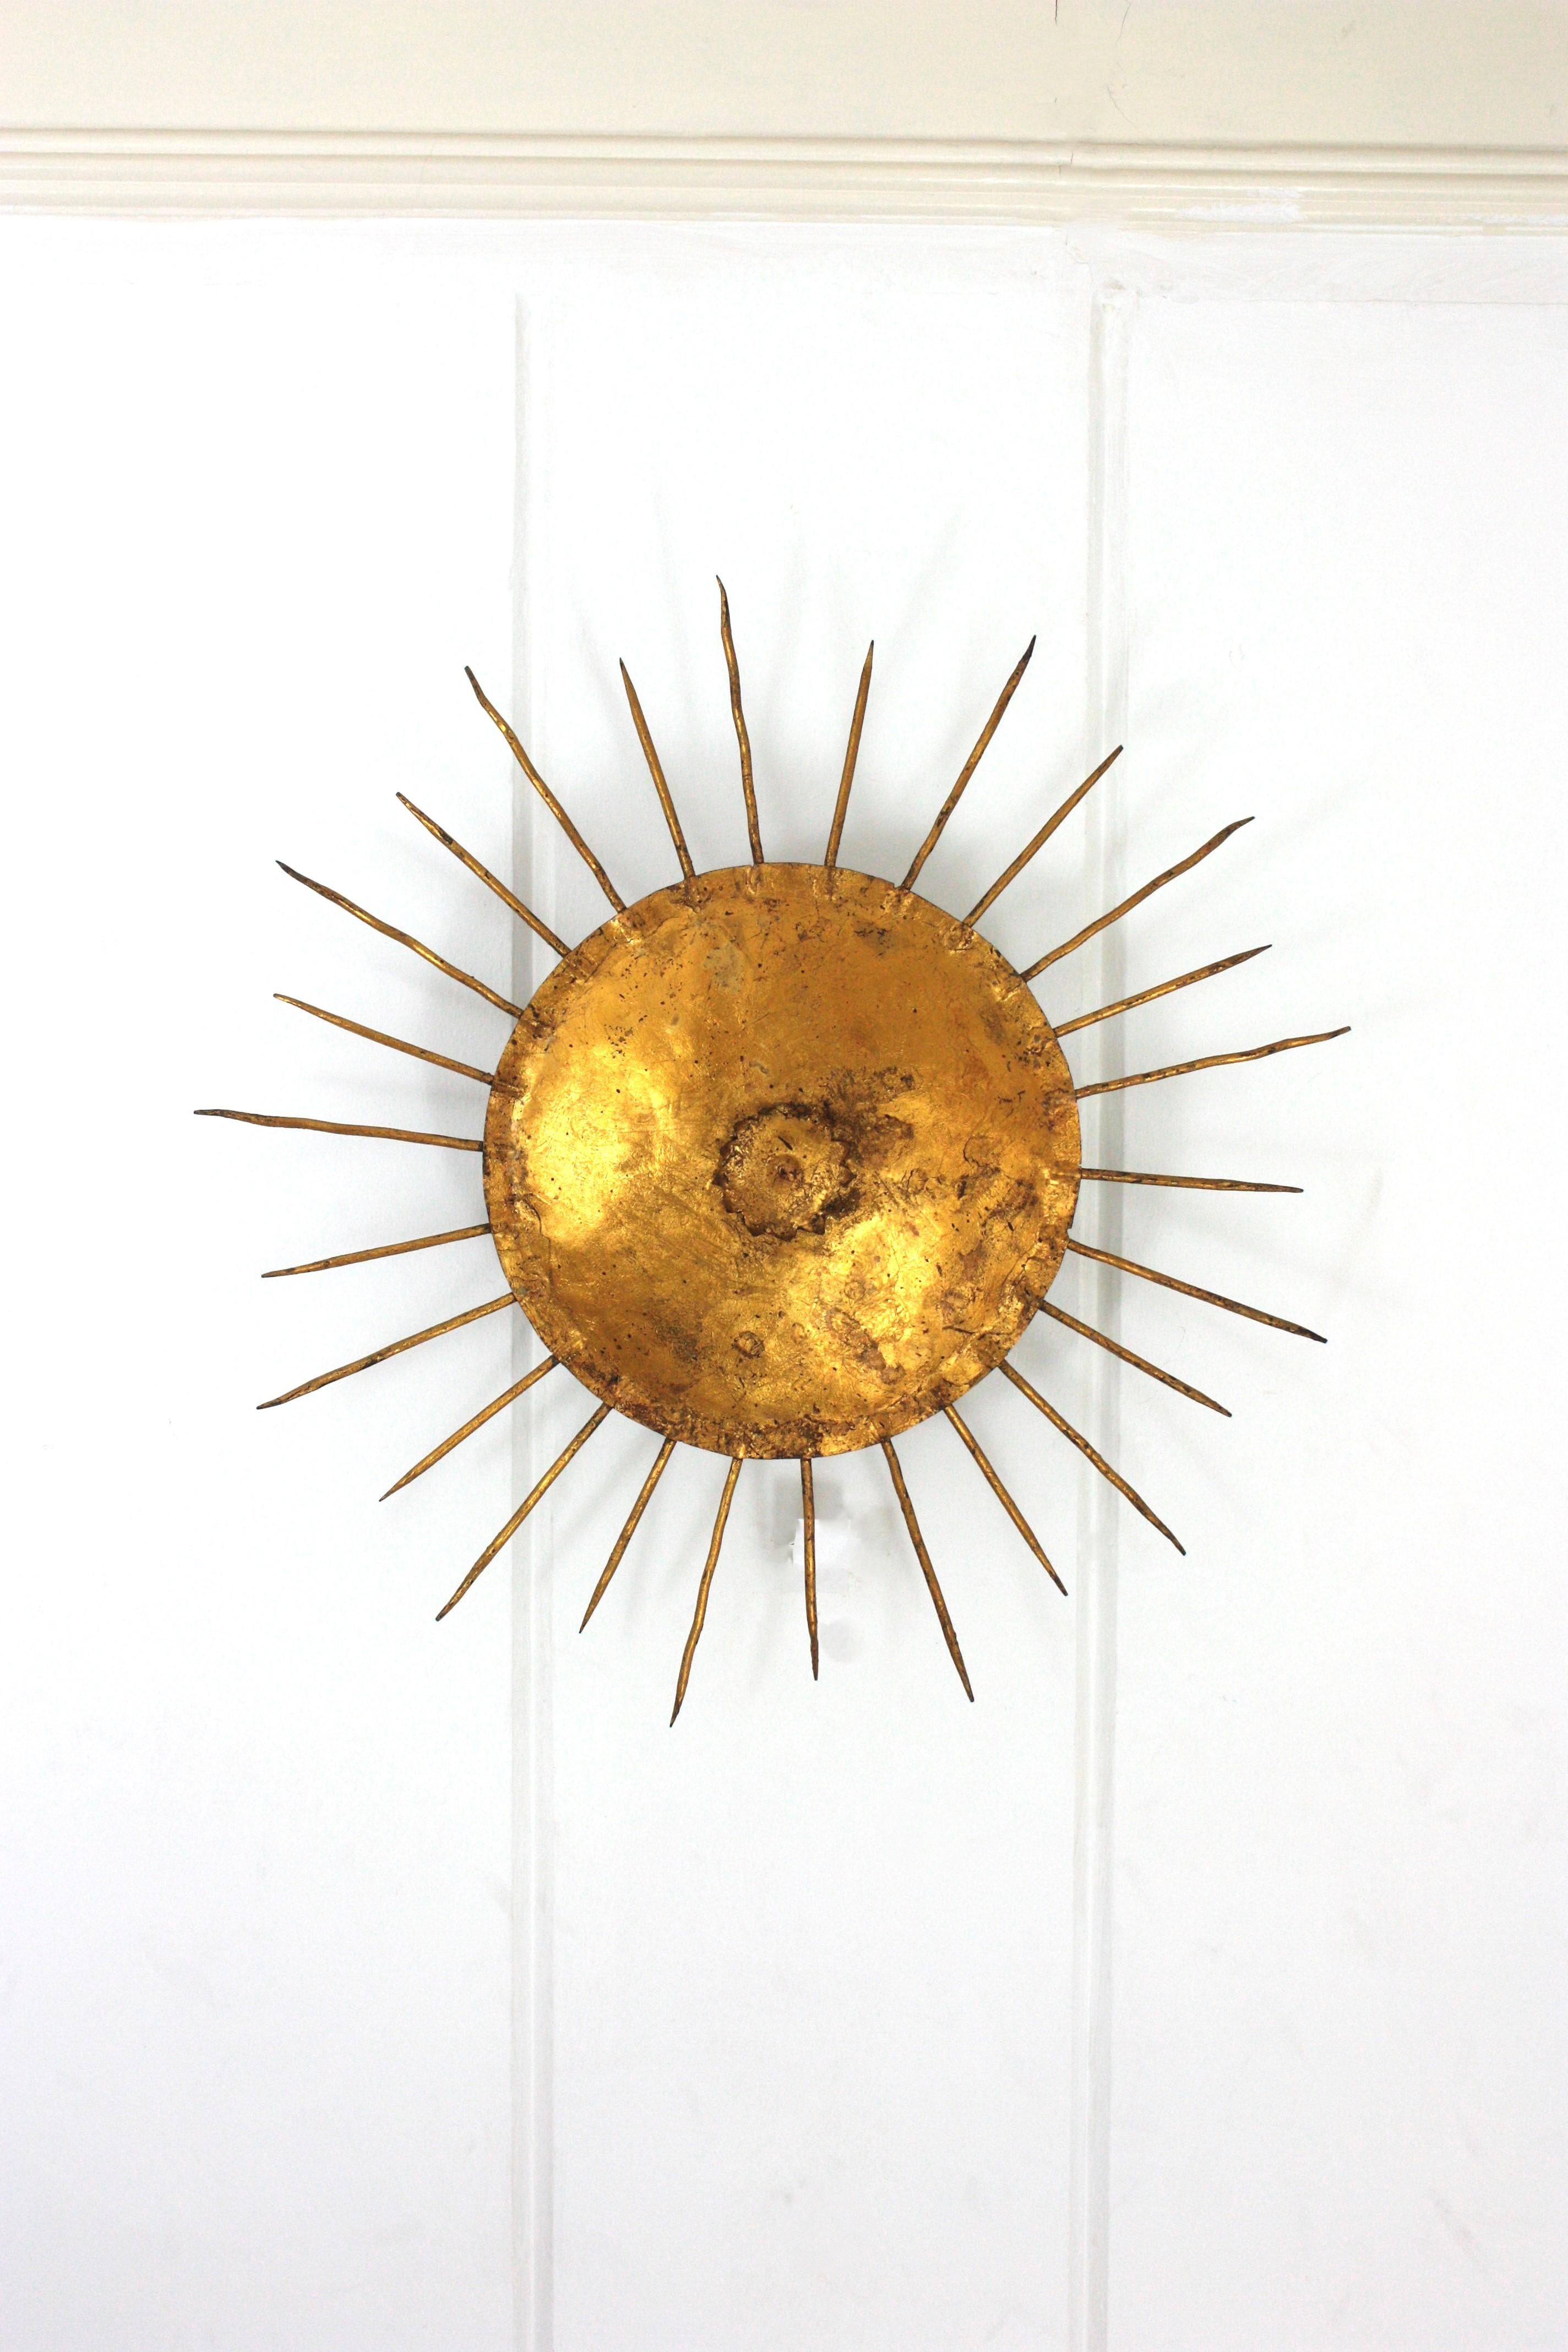 French Sunburst Ceiling Light Fixture in Gilt Wrought Iron For Sale 5